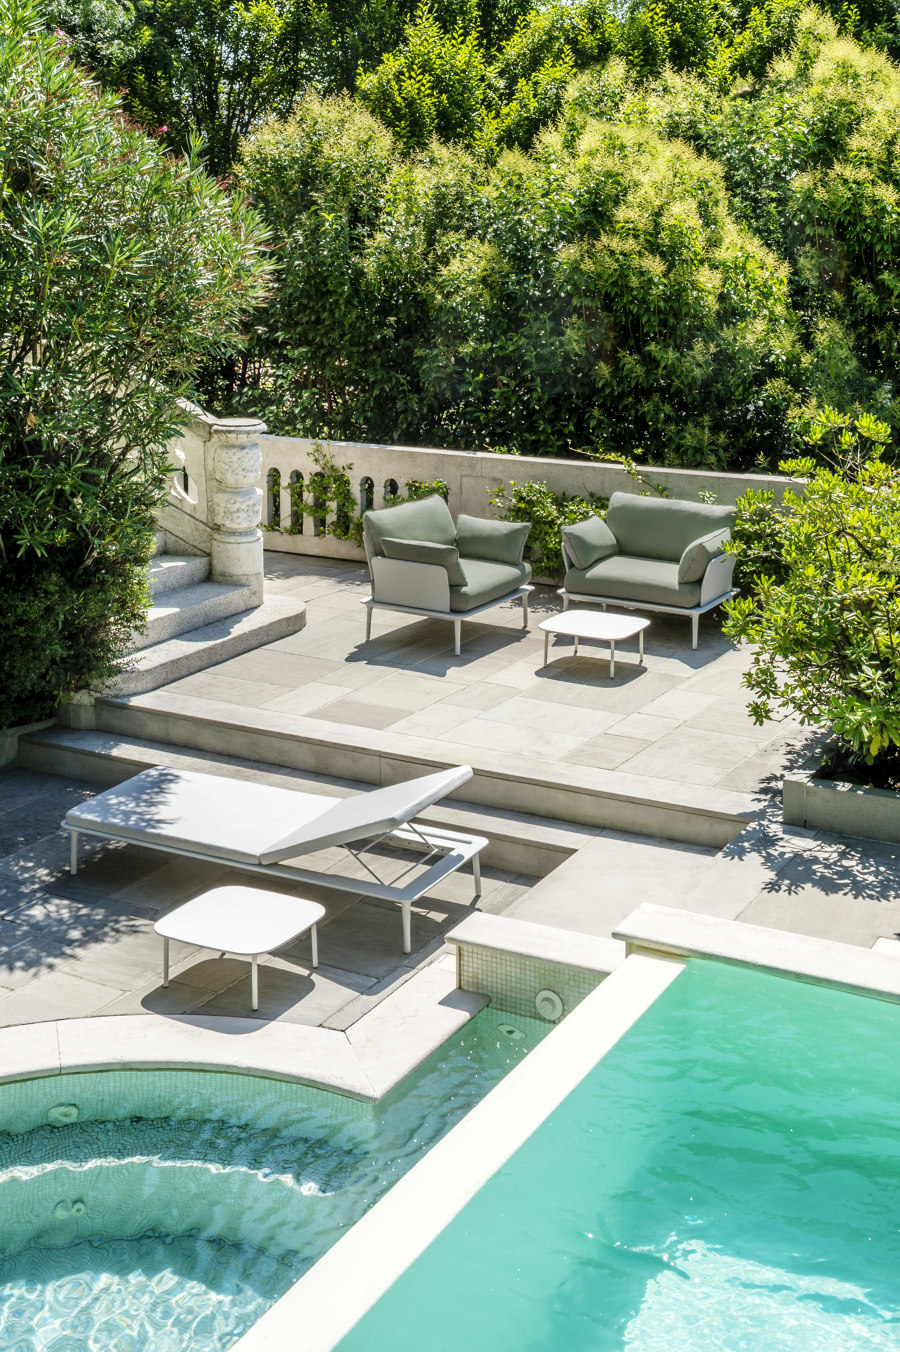 It's elementary: new outdoor furniture from Pedrali | News